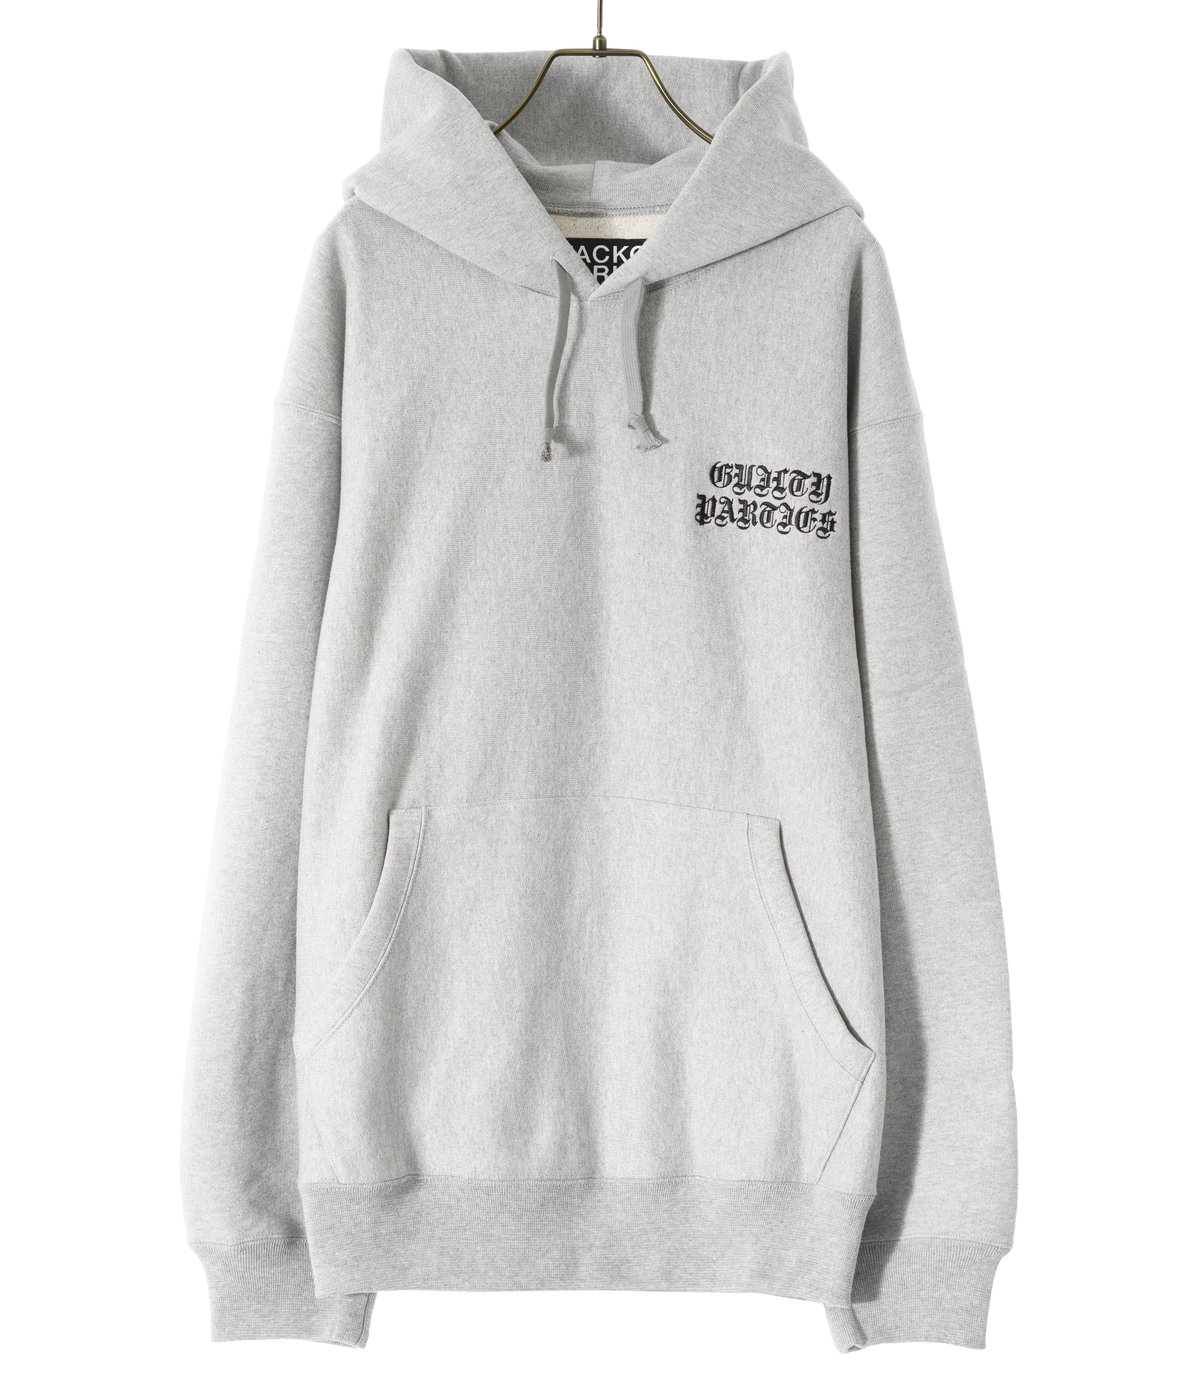 HEAVY WEIGHT PULLOVER HOODED SWEAT SHIRT